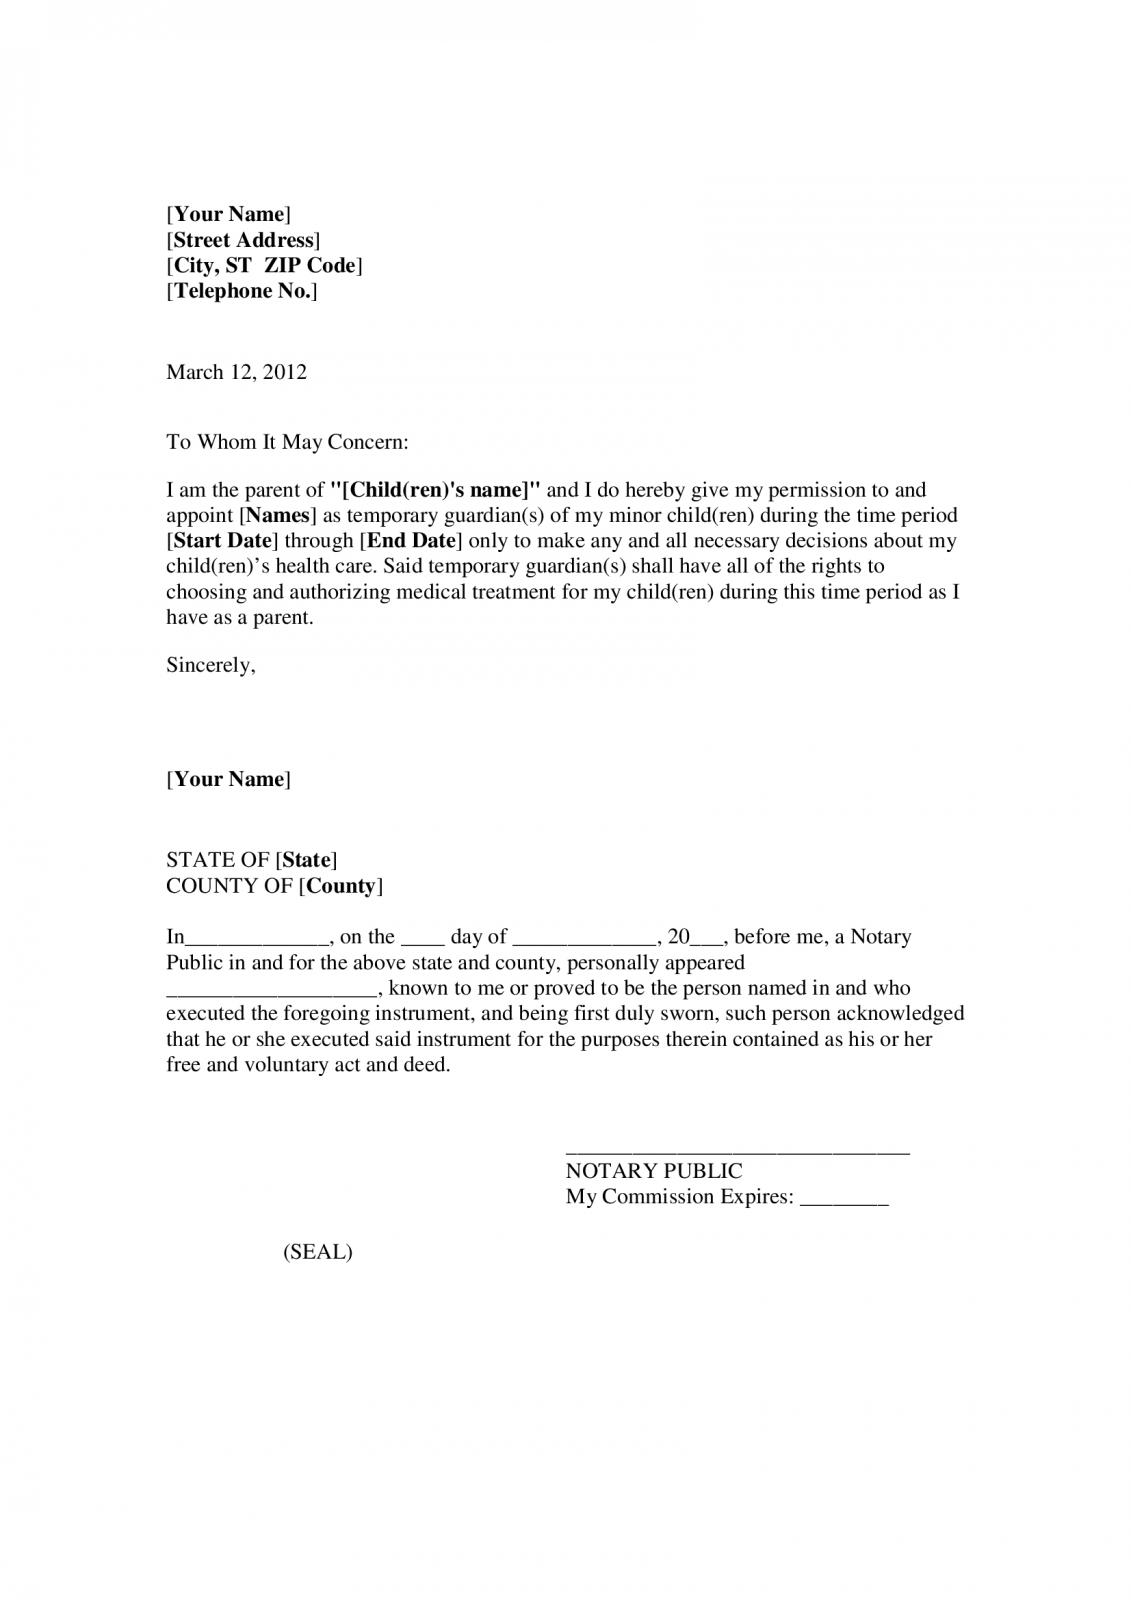 Letter To Attorney Template from blanker.org